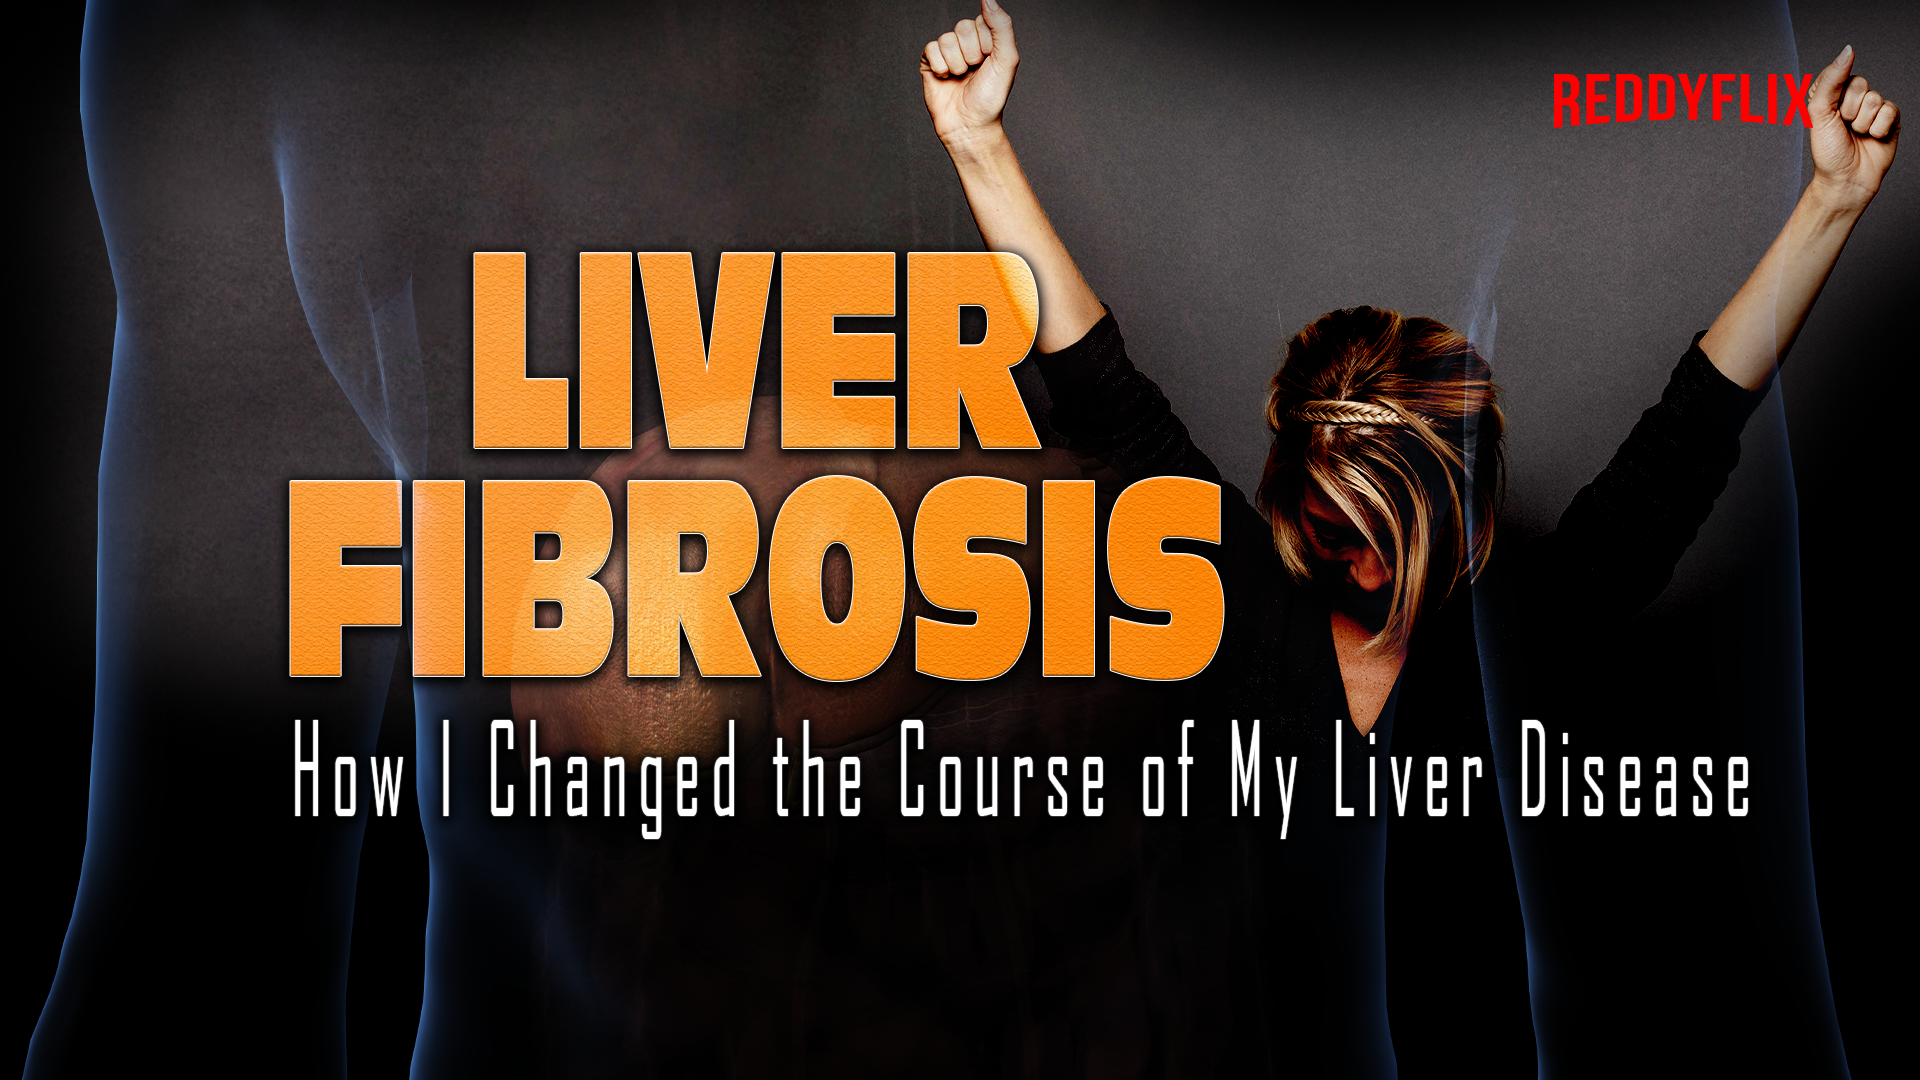 LIVER FIBROSIS: How I Changed the Course of My Liver Disease